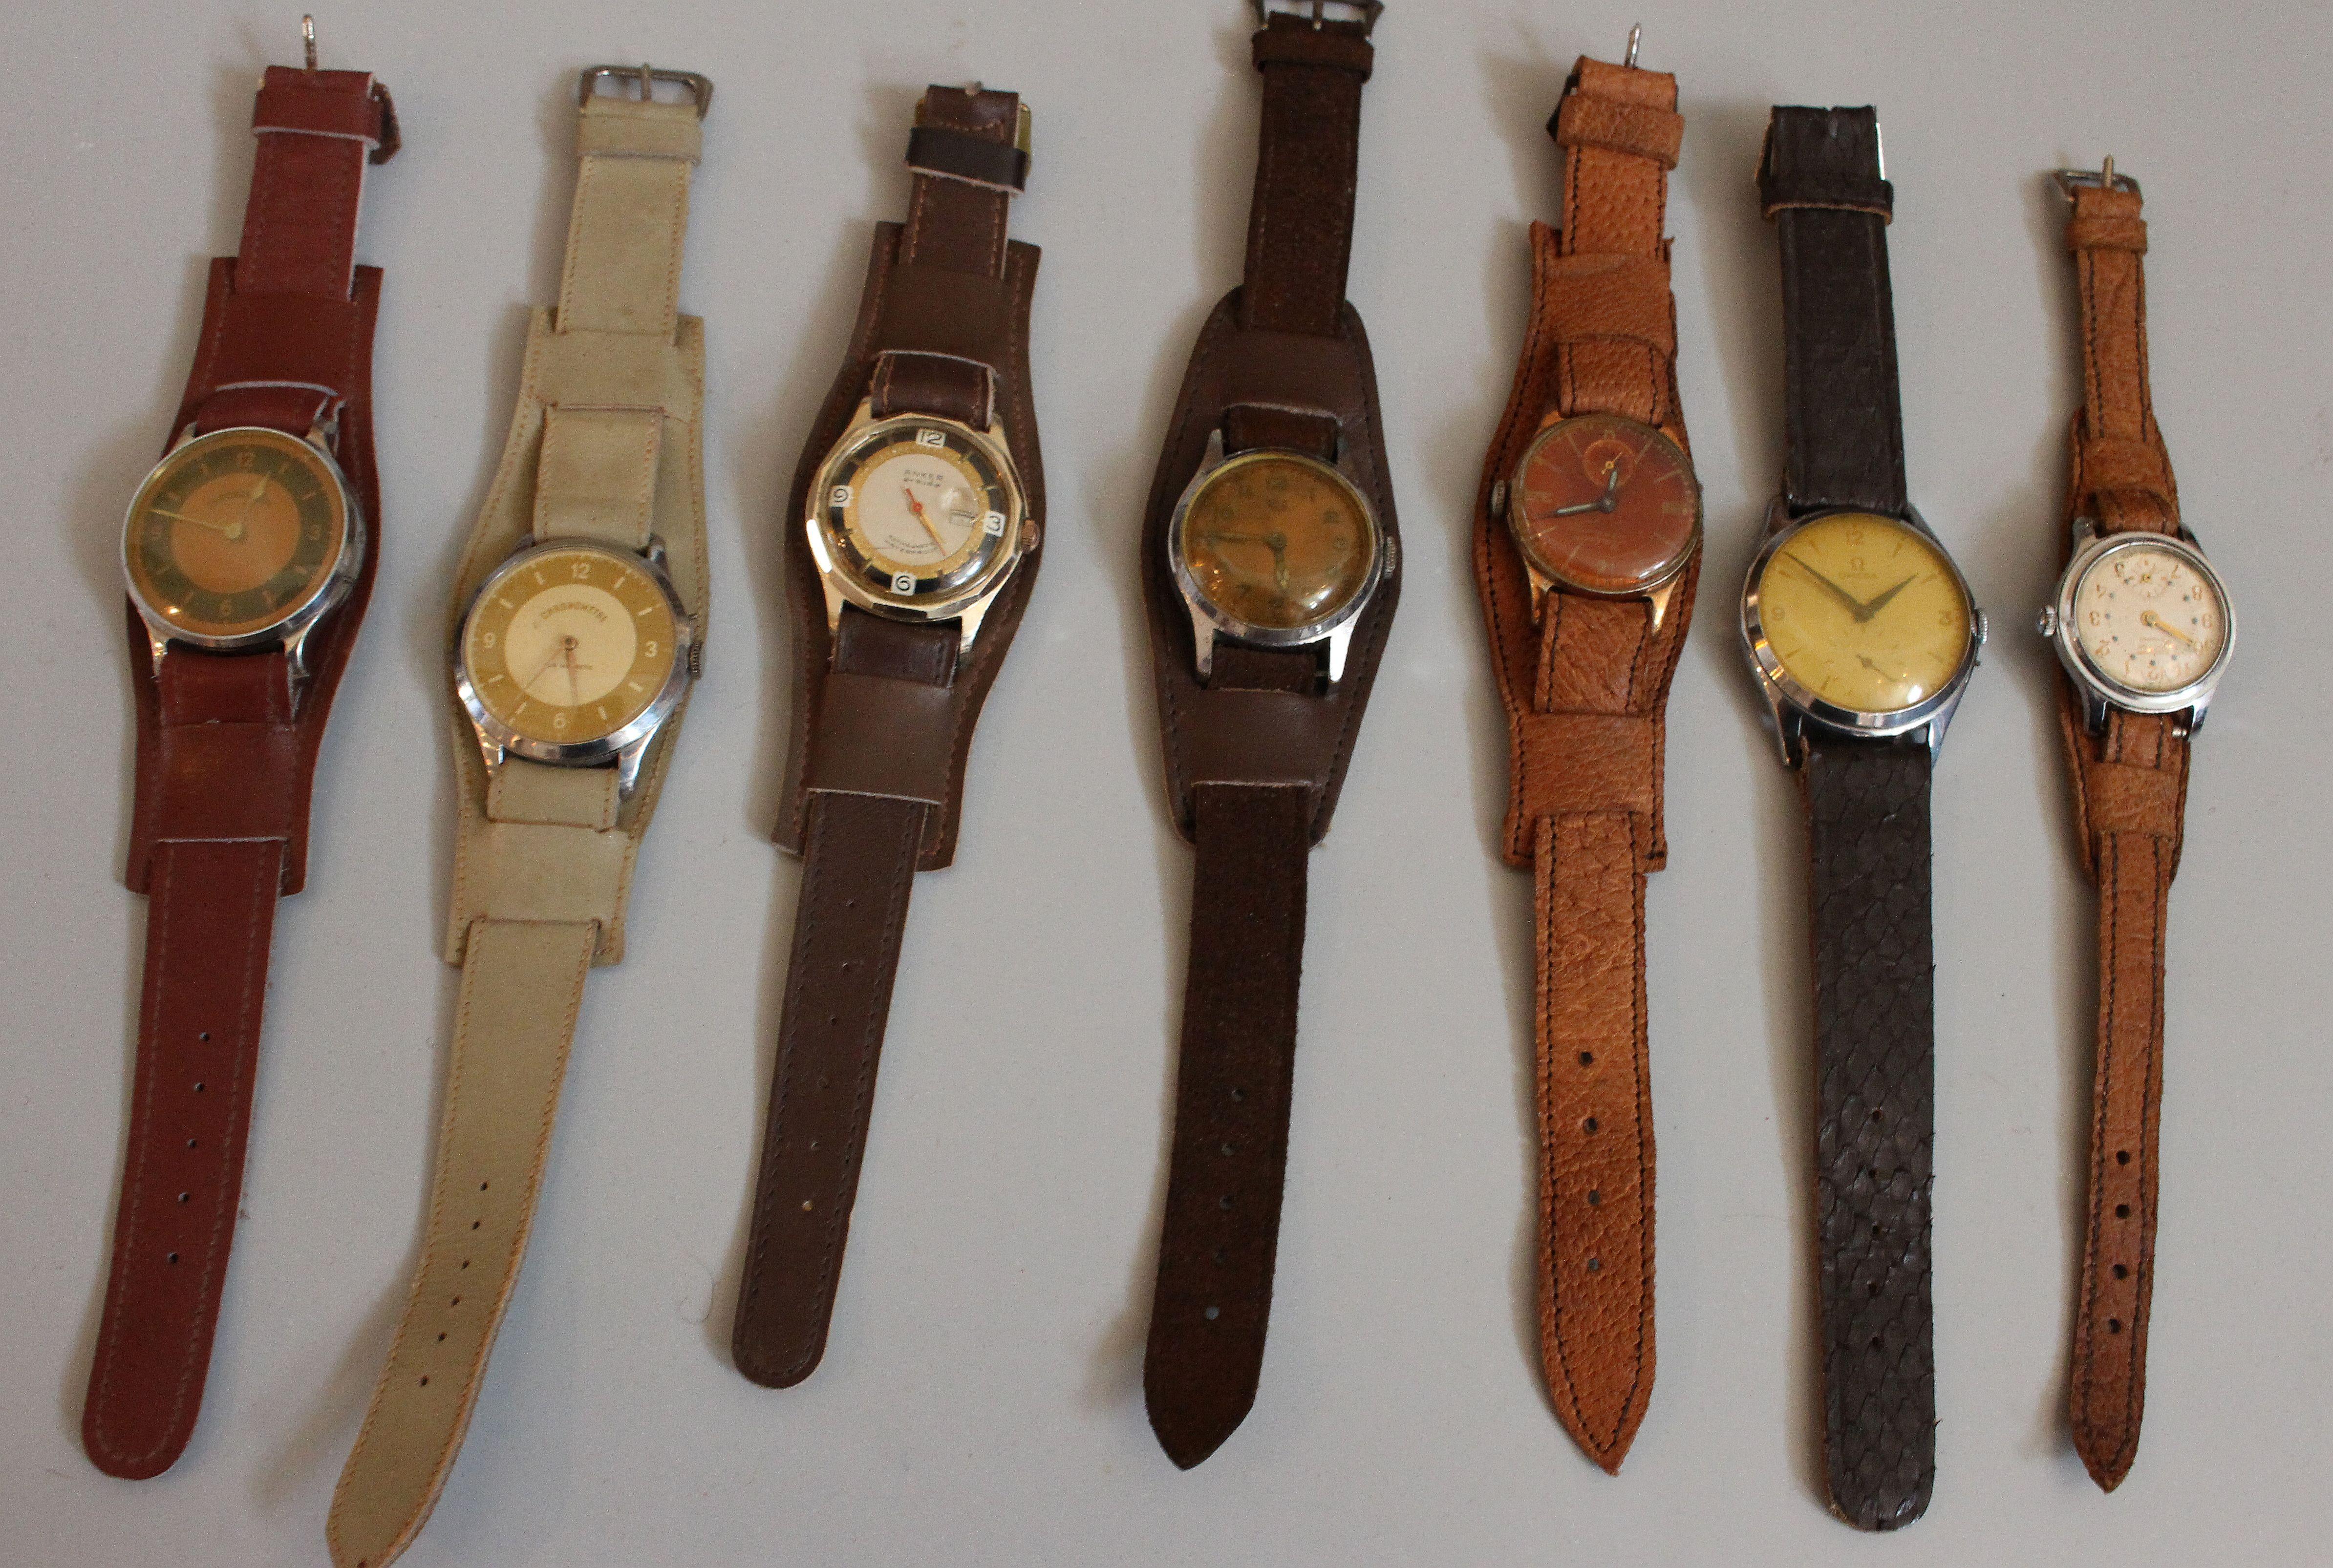 European Vintage Wristwatches Anker, Omega, Orion, Lanco Swiss, Chronometre In Fair Condition For Sale In New York, NY